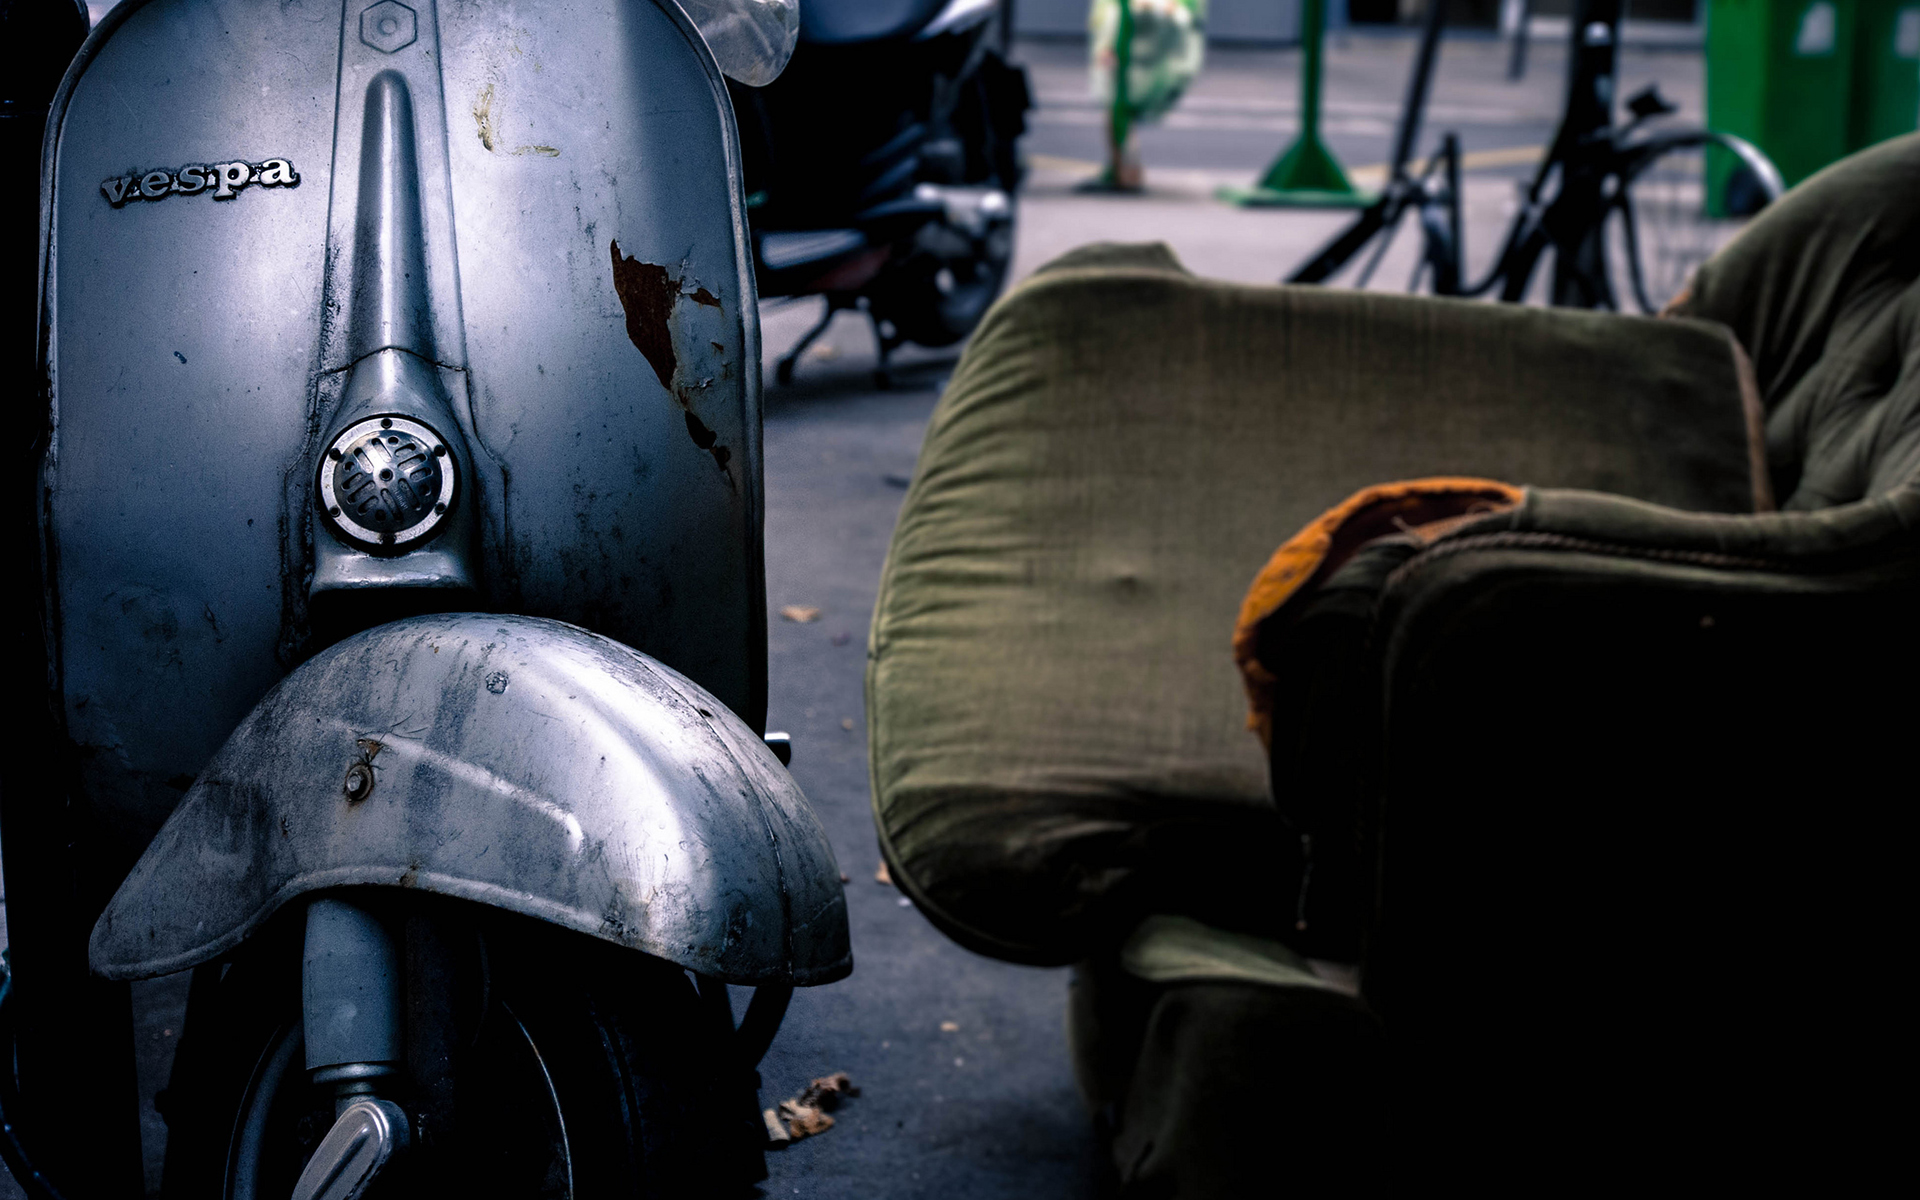 Old Vespa Scooter Exclusive HD Wallpaper